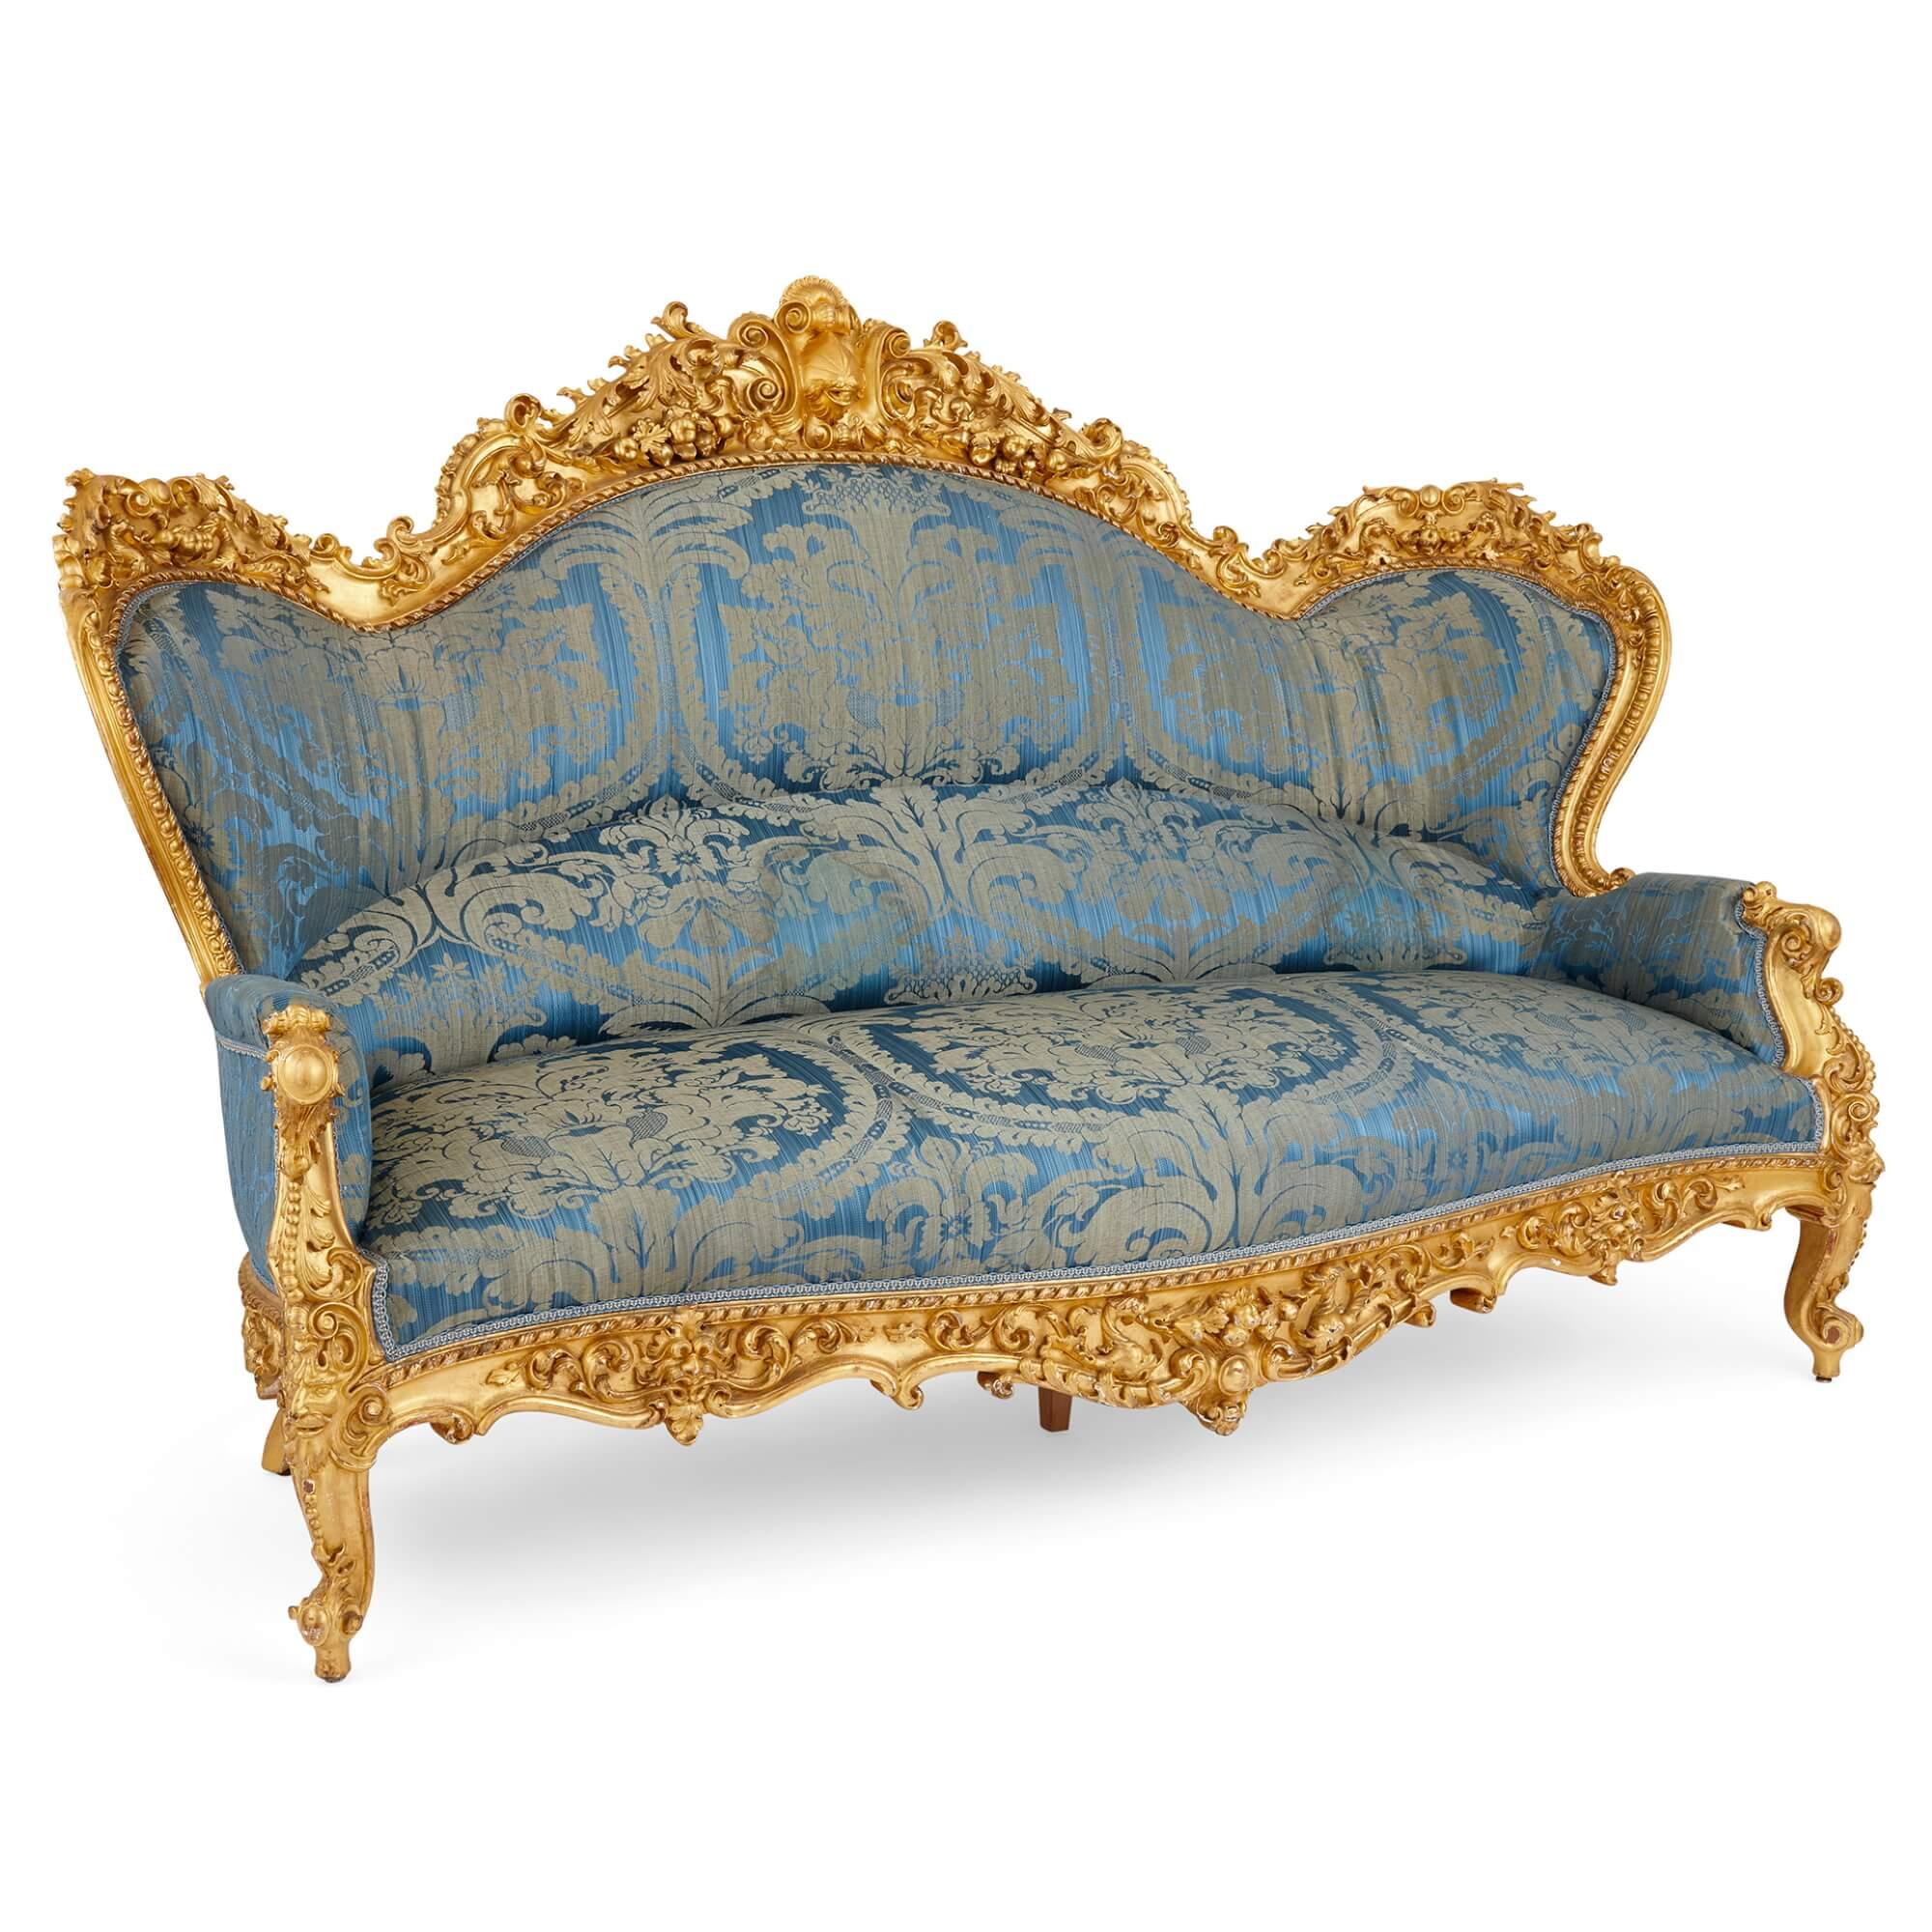 Large French Rococo Revival style giltwood sofa.
French, late 19th century.
Measures: height 135cm, width 196cm, depth 90cm.

This remarkable piece is a large, French, Rococo revival carved giltwood sofa made in the late nineteenth century,